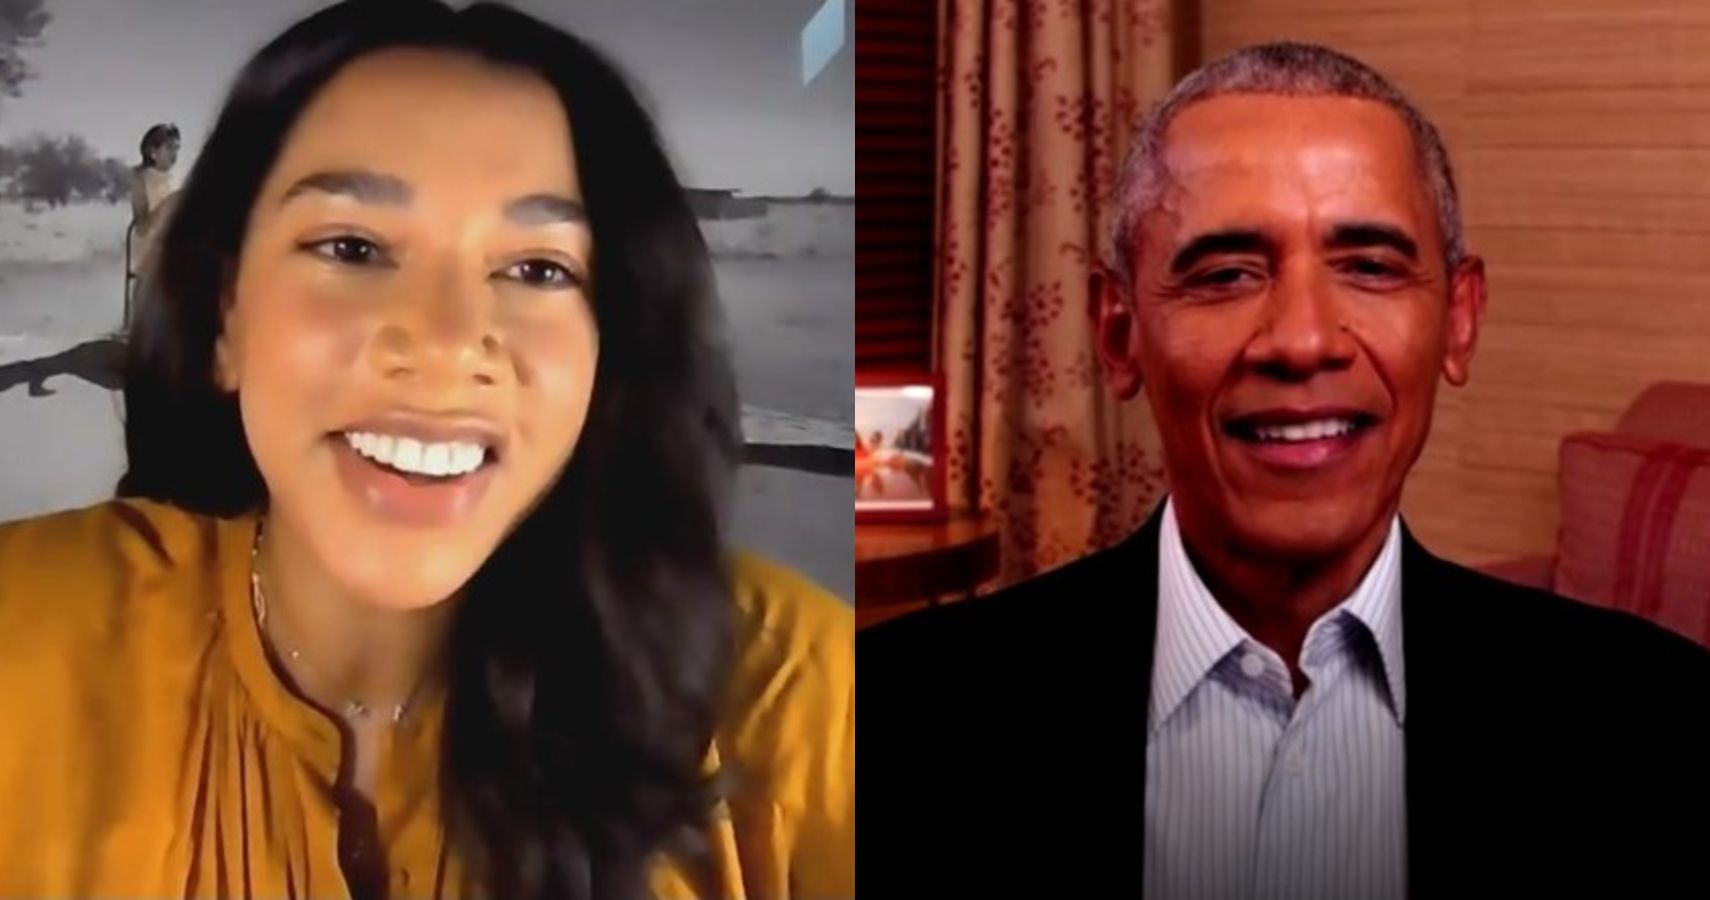 Barack Obama helps influencer Hannah Bronfman announce birth of first child